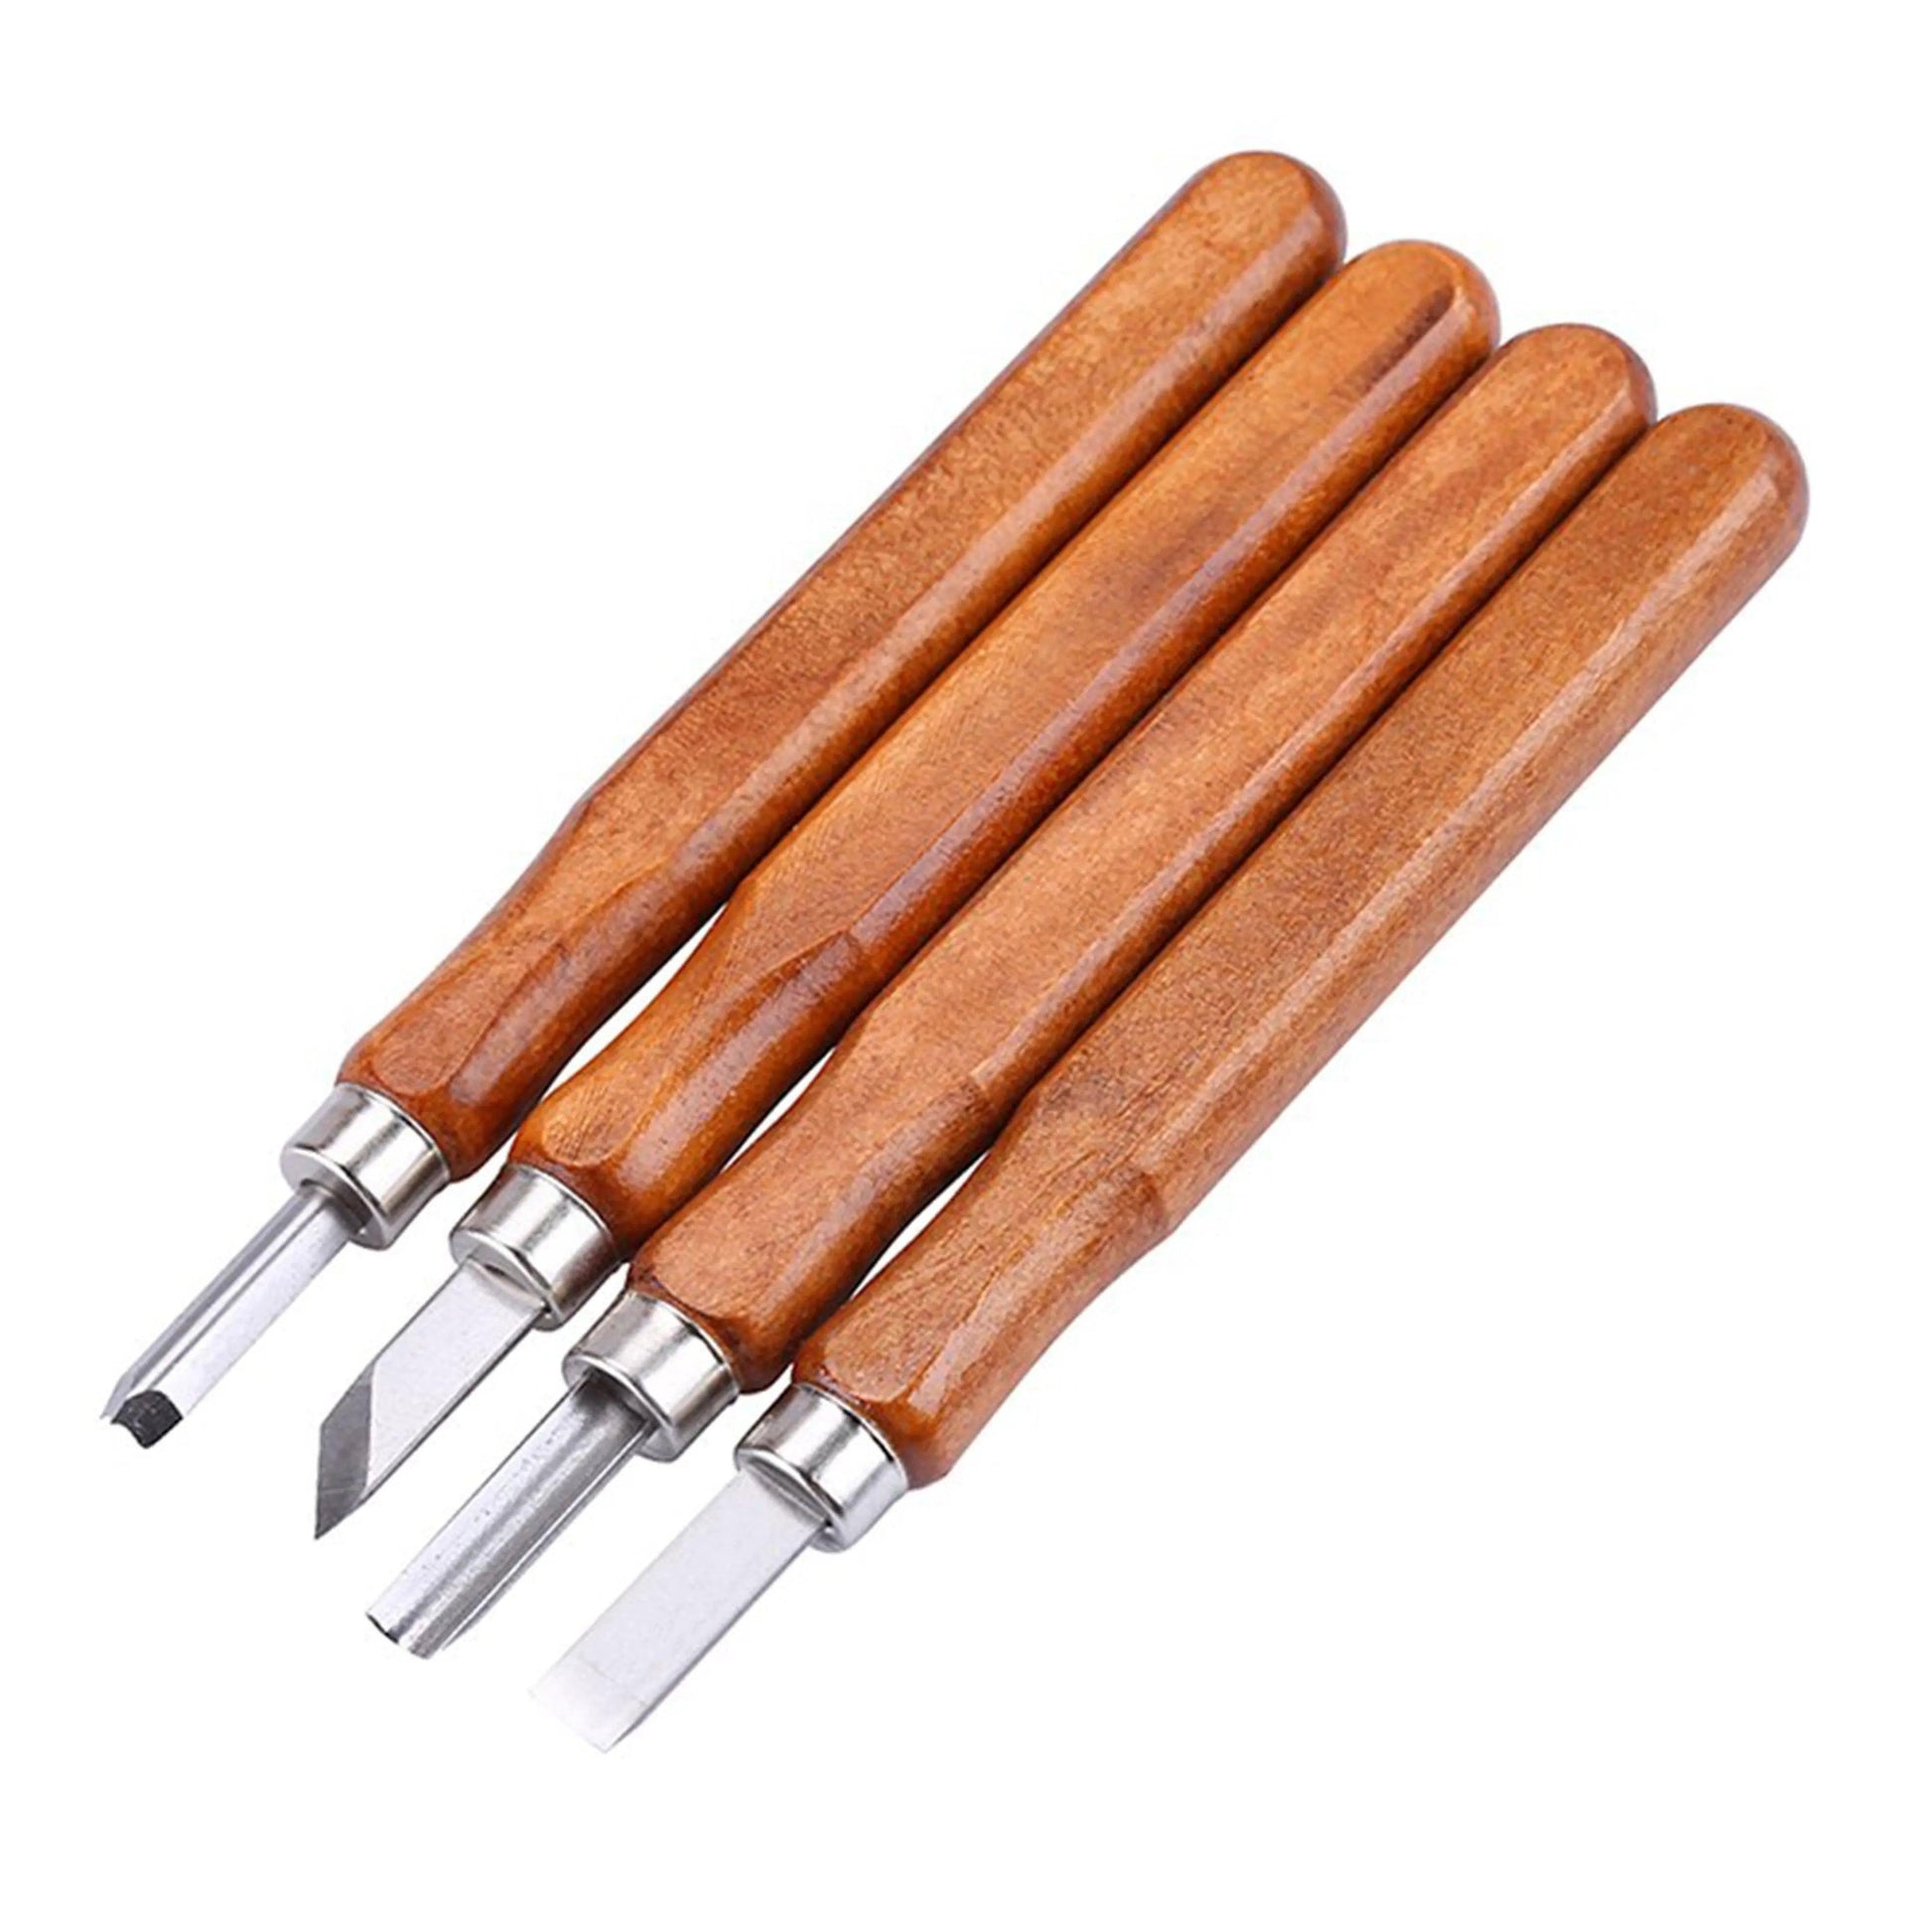 wooden carving set 4 pcs The Stationers